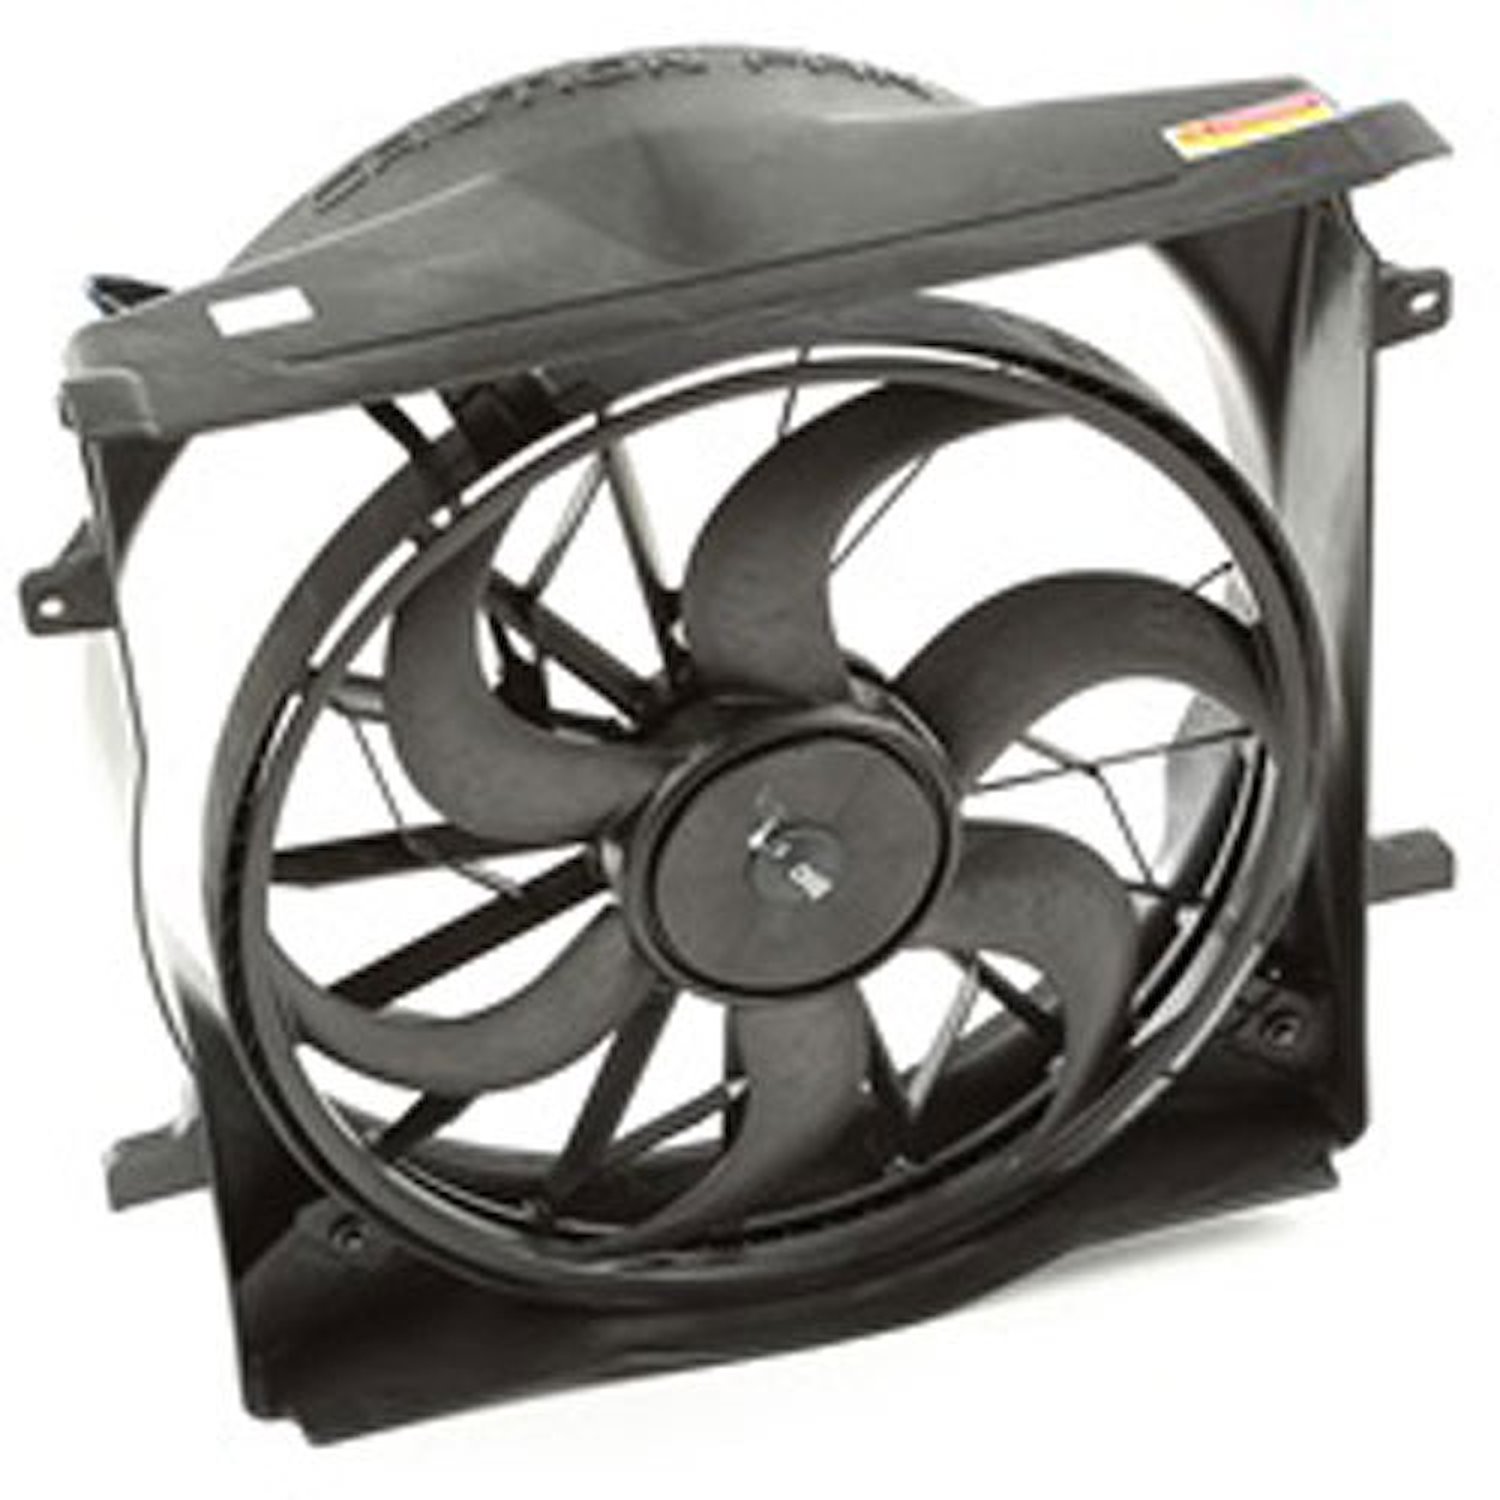 This radiator fan assembly from Omix-ADA fits 04-06 Jeep Libertys with 3 pin connectors.